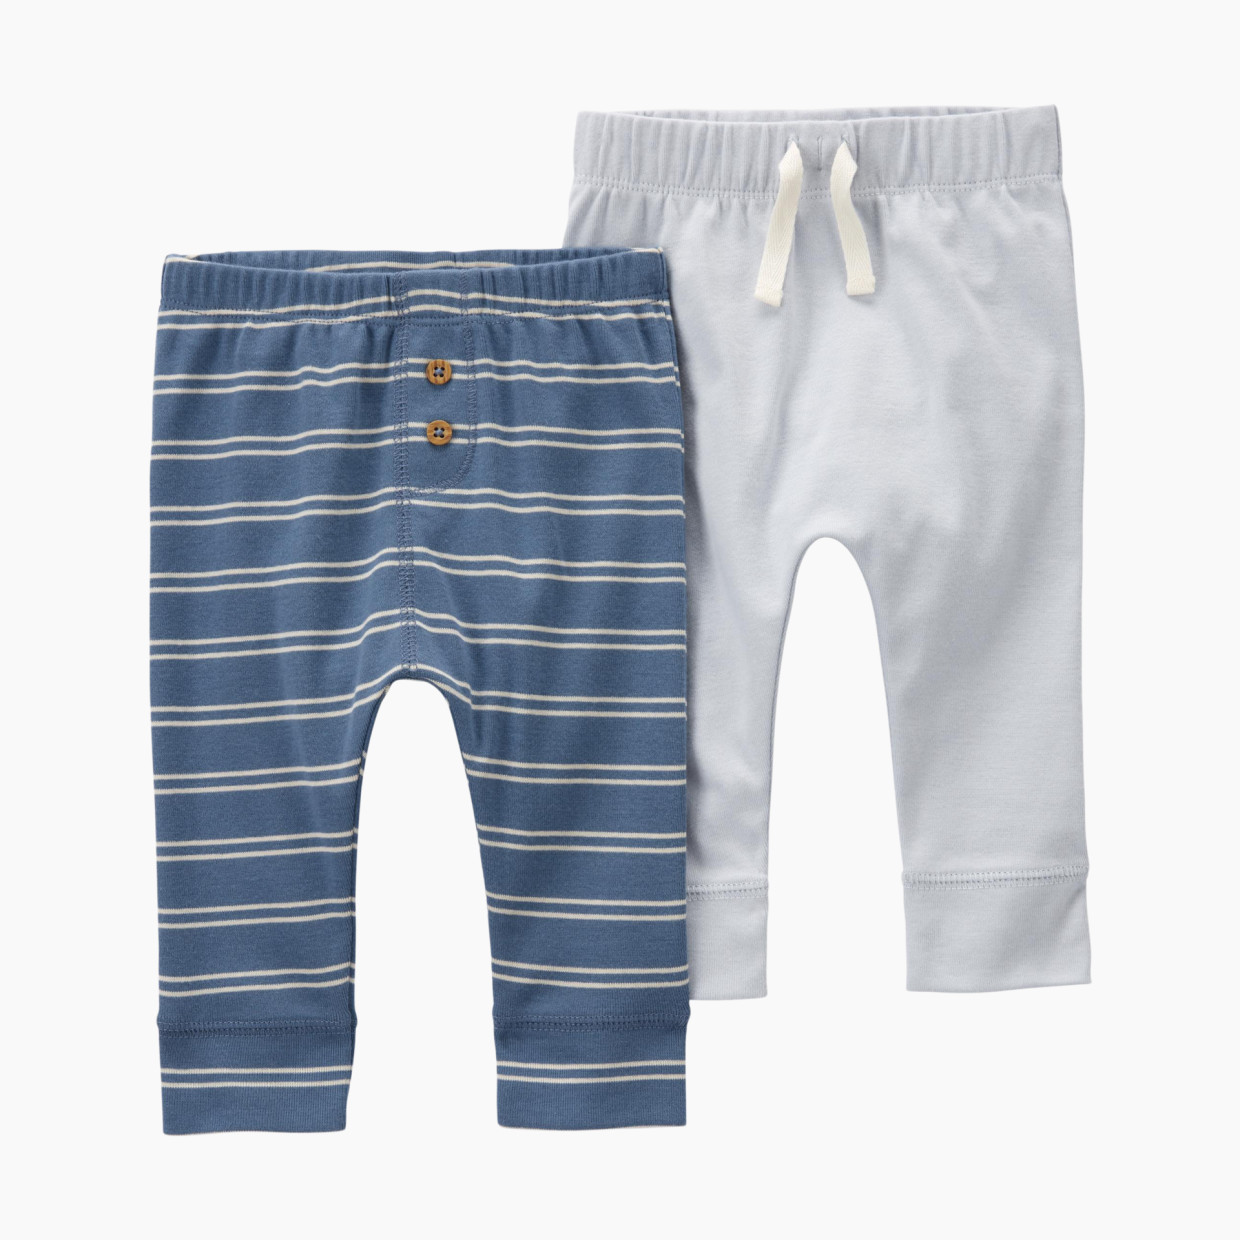 Carter's 2-Pack Pull-On Pants - Blue/Gray, 3 M.